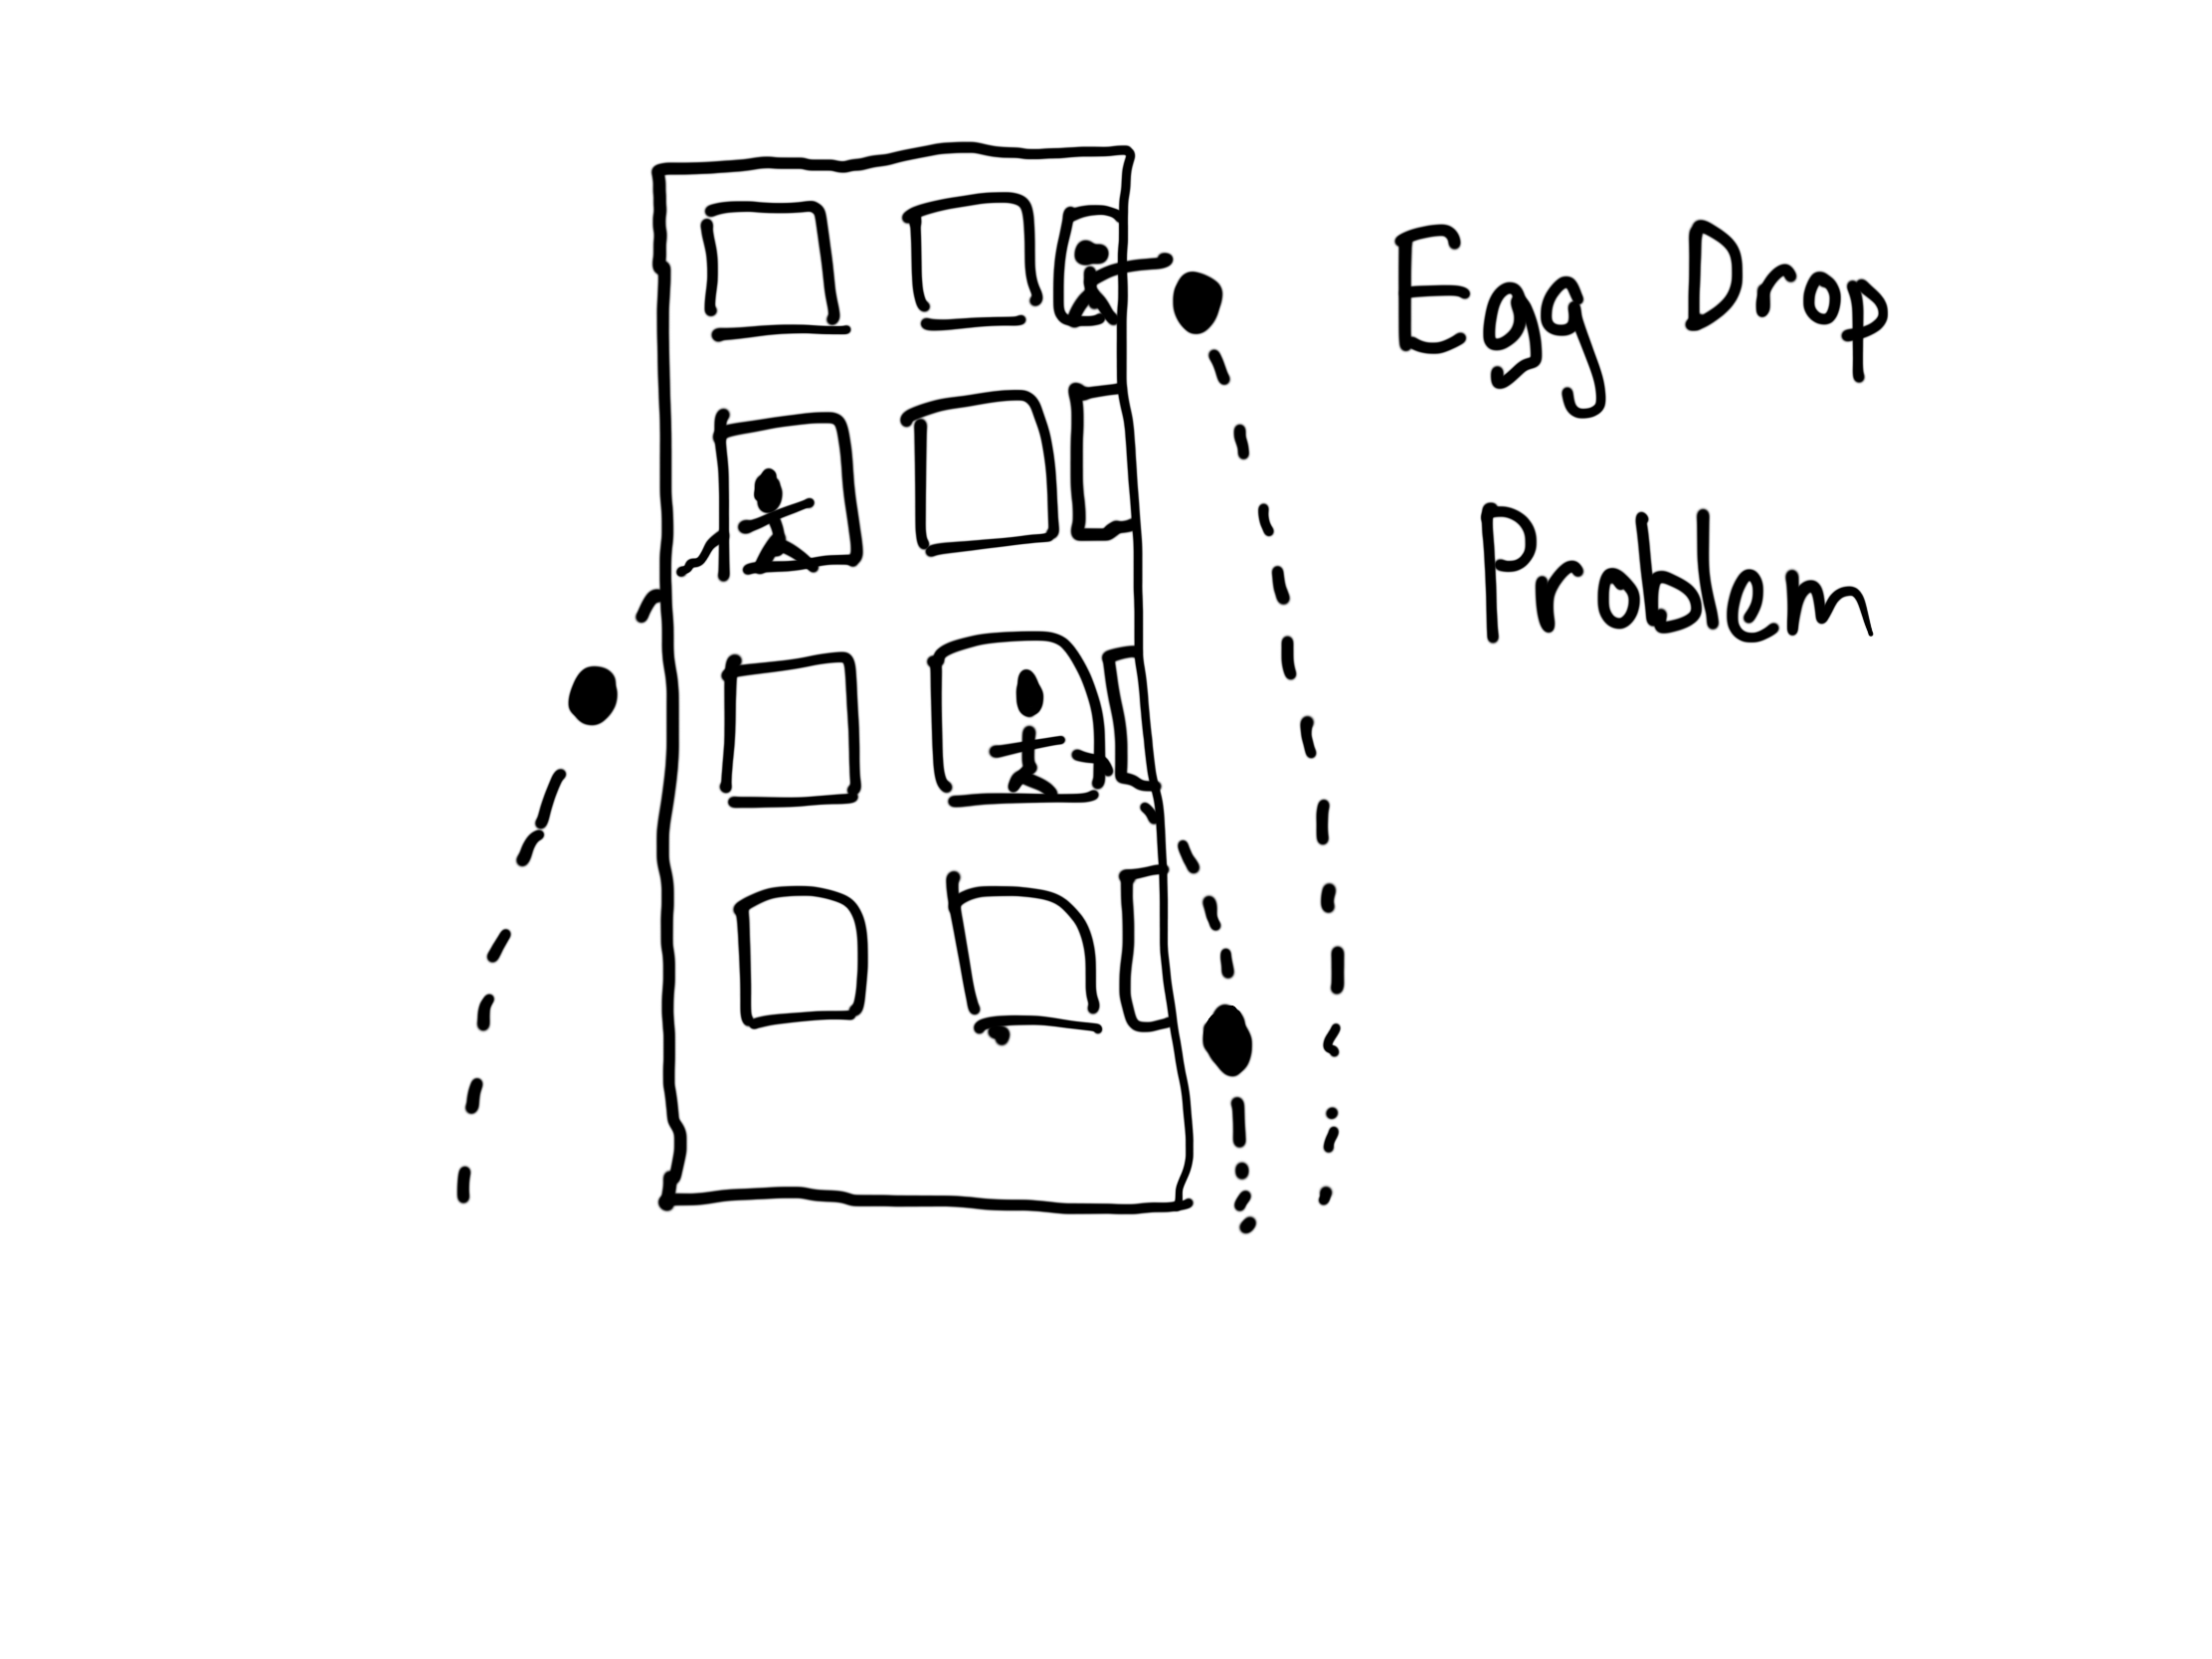 building with eggs being dropped